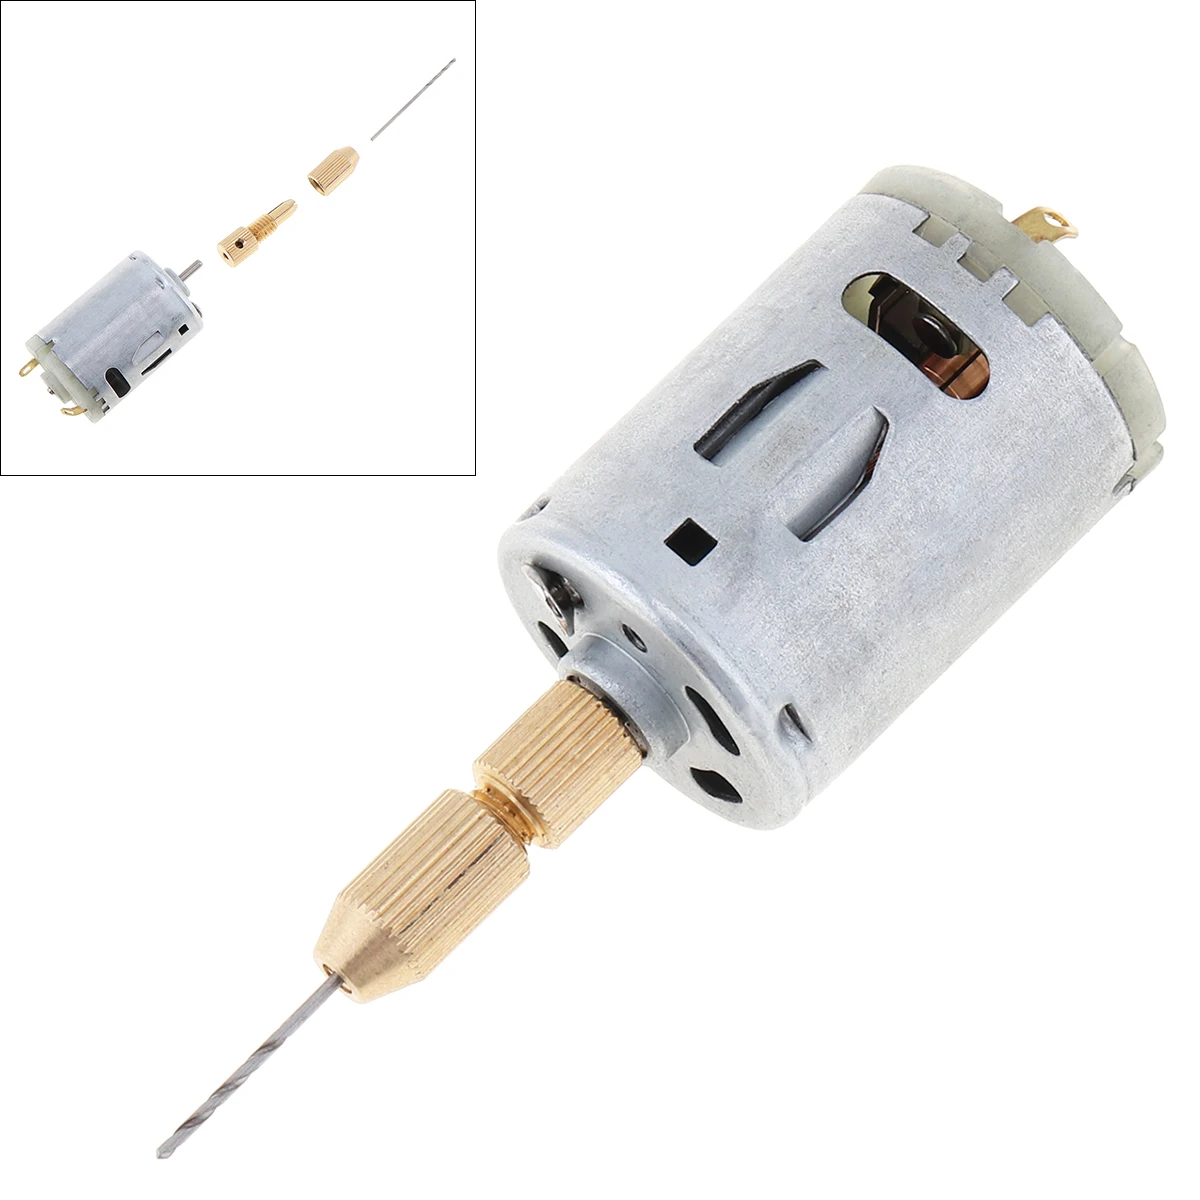 12V Electric Motor Mini Small PCB Hand Drill Press Drilling Set DIY Tool with 1mm | Инструменты